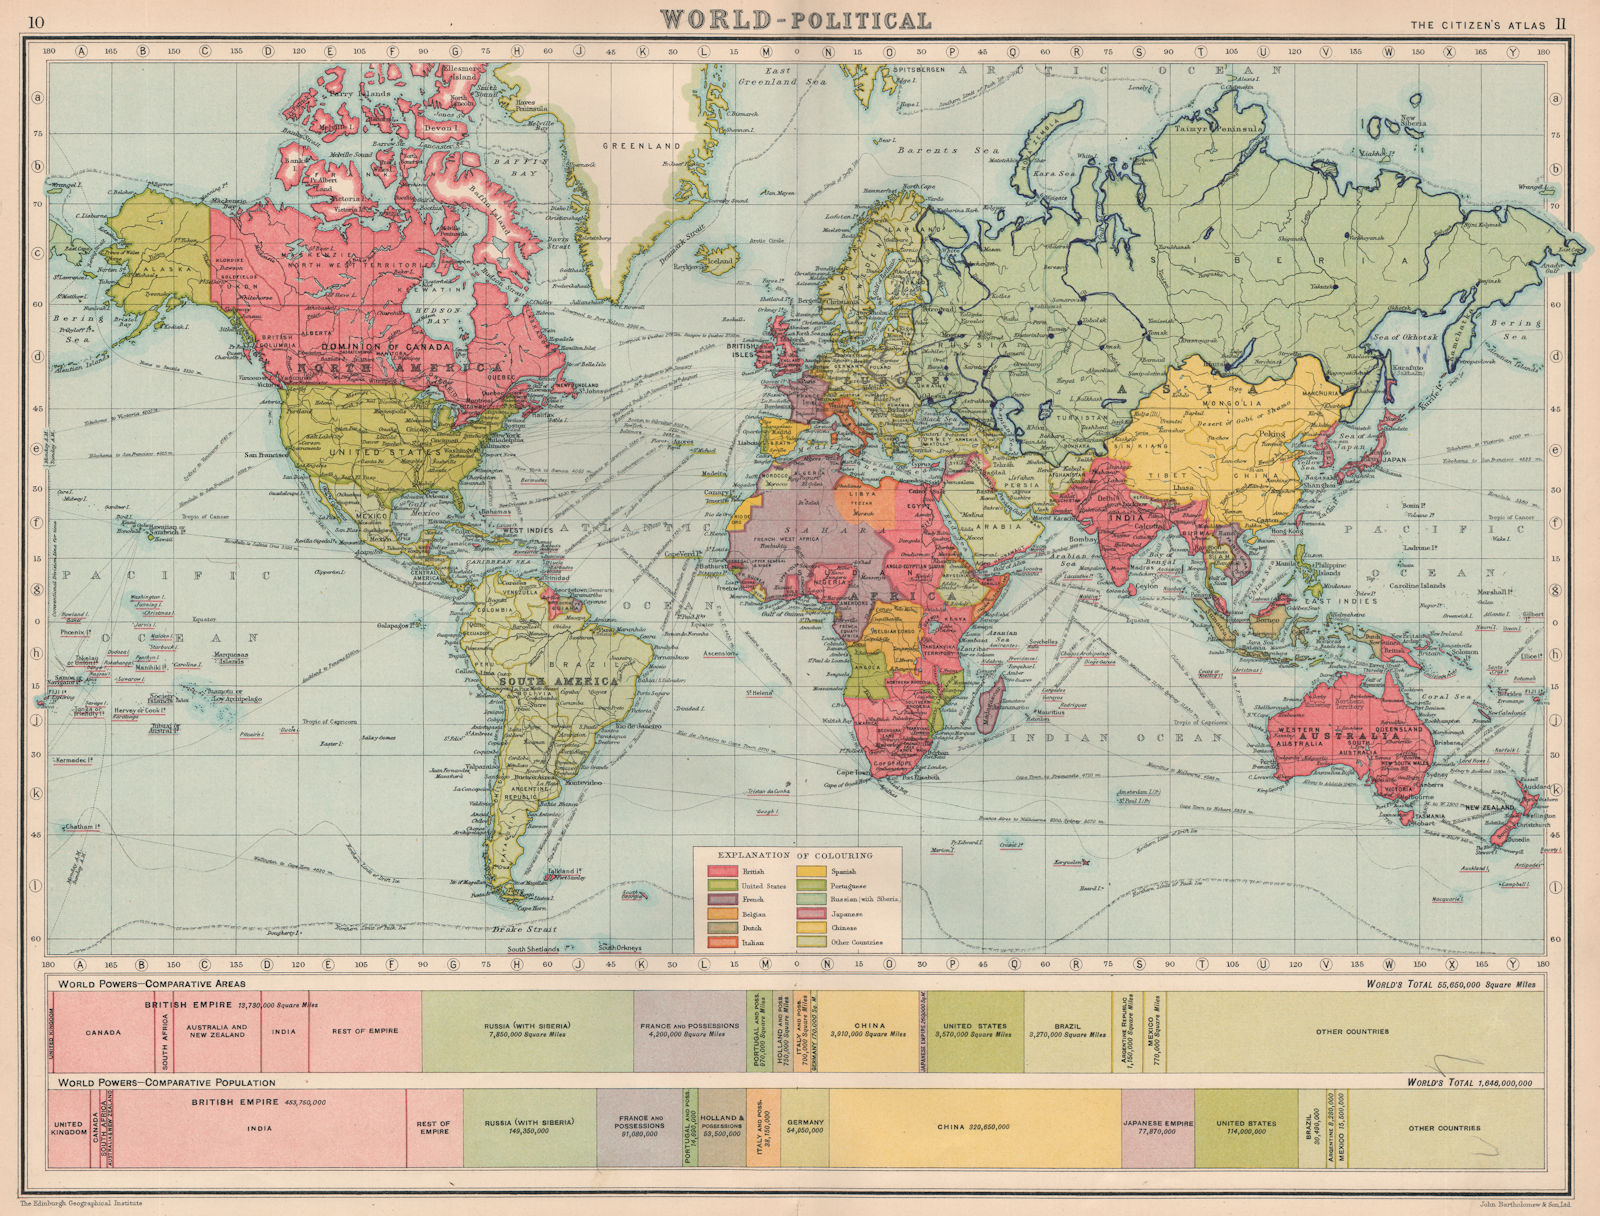 WORLD-POLITICAL.Population & areas of great powers compared.BARTHOLOMEW 1924 map